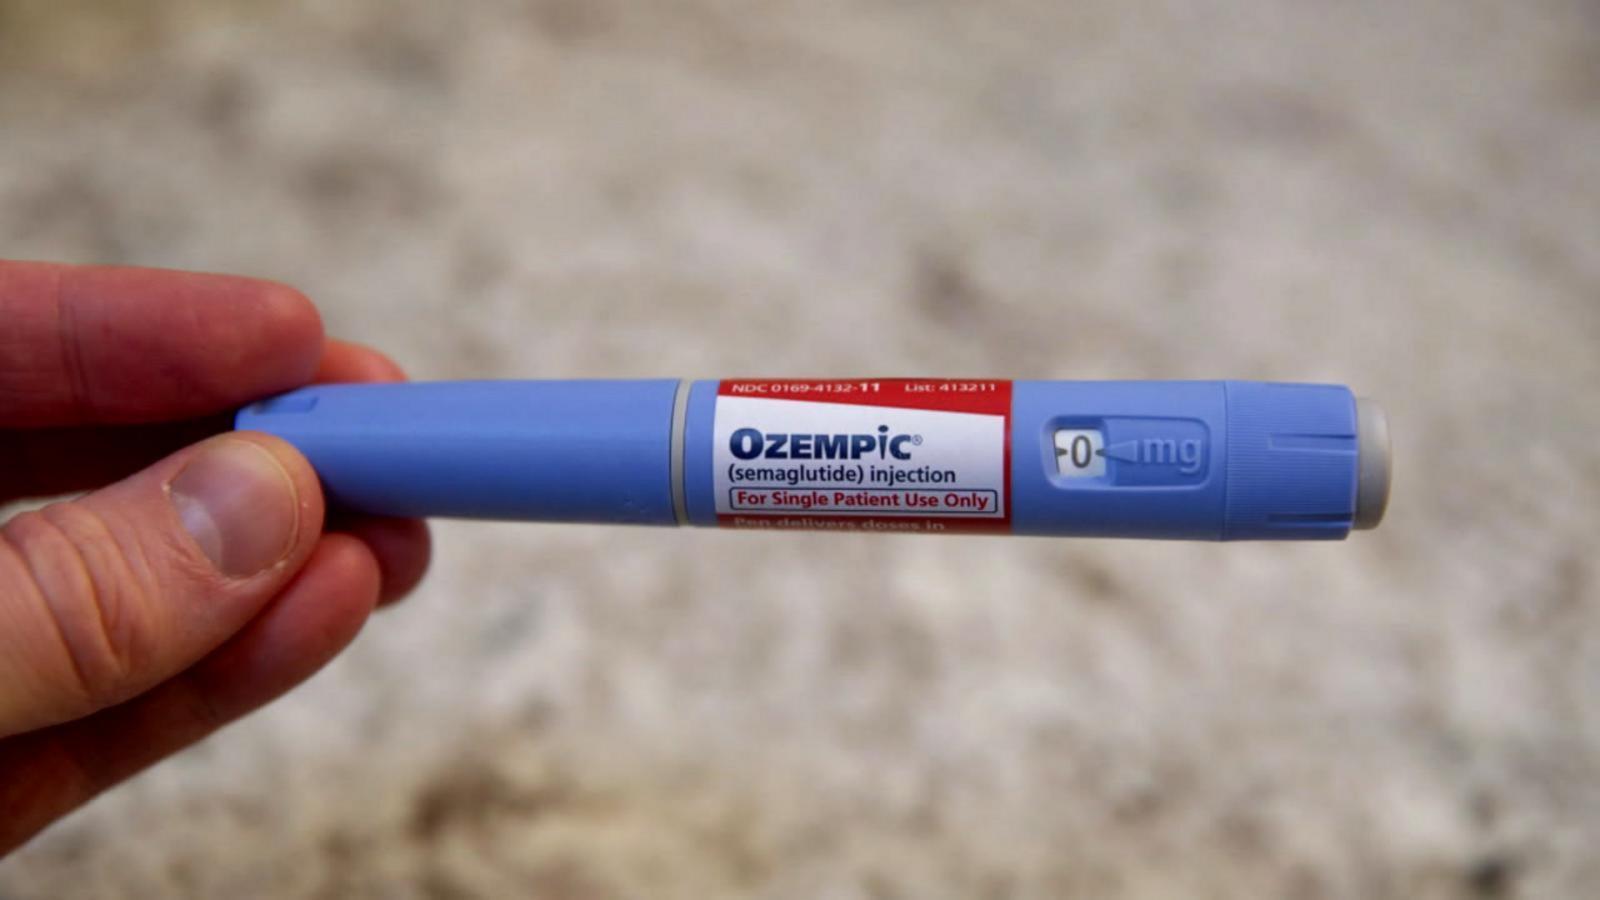 The effect of Ozempic use on mental health